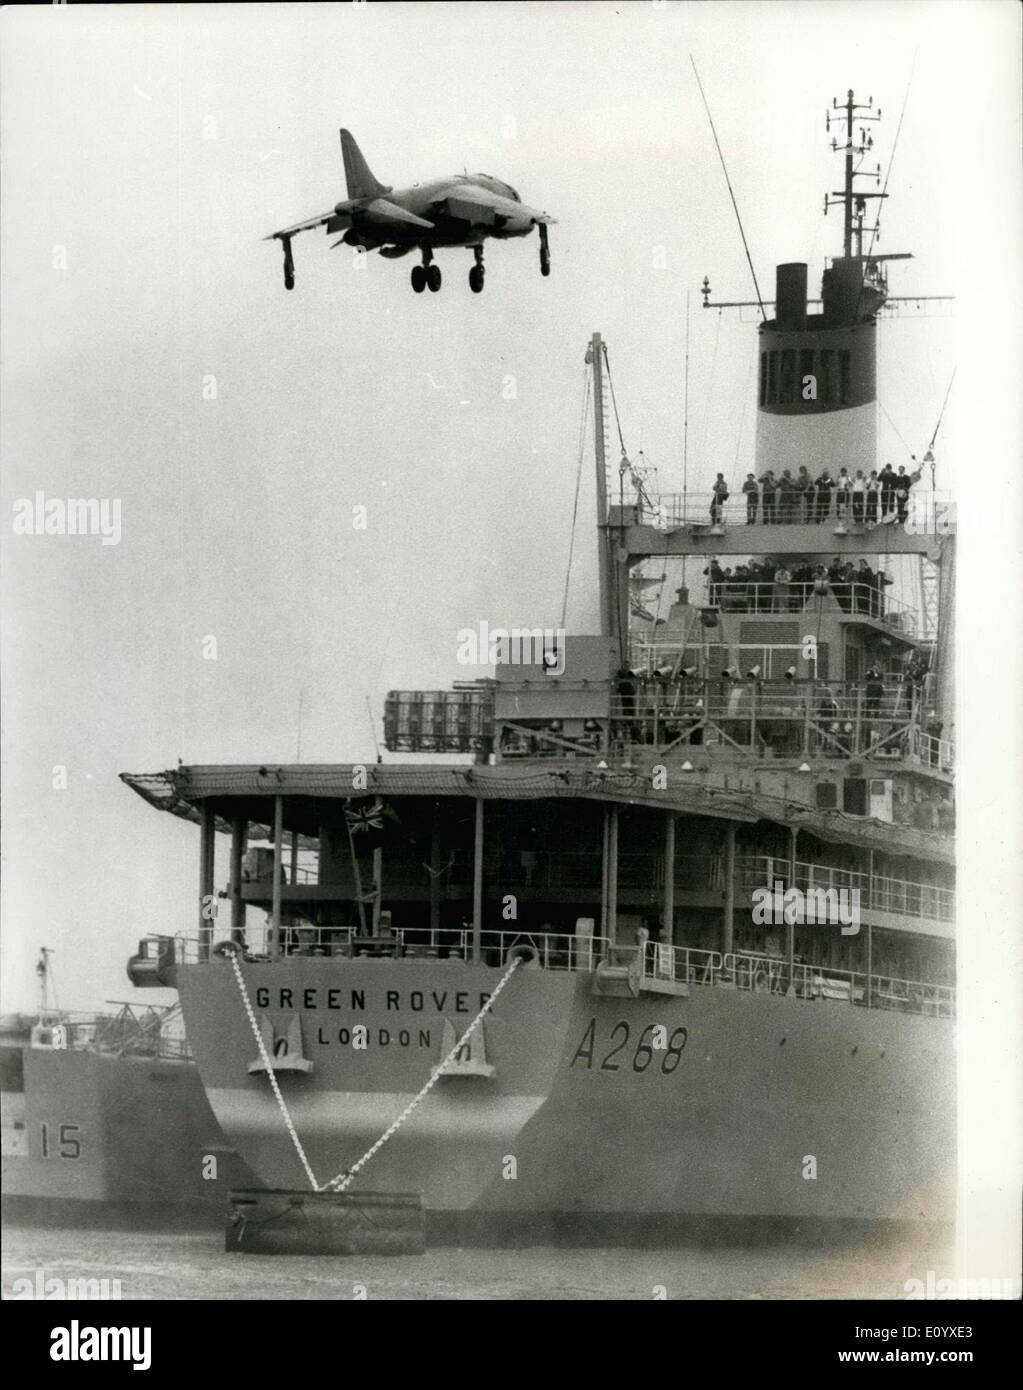 Sep. 23, 1971 - Harrier Jump Jet Deck Landing at Greenwich: A Hawker Siddeley V/Stol Harrier jet today made a vertical landing and take -off from the deck of the Royal Fleet Auxiliary ''Green Rover'', moored in the River Thames at Greenwich, London, The operation was watched by senior officers of many of the world's navies, who were attending the Royal Navy Equipment Exhibition at the royal Naval College, Greenwich Stock Photo